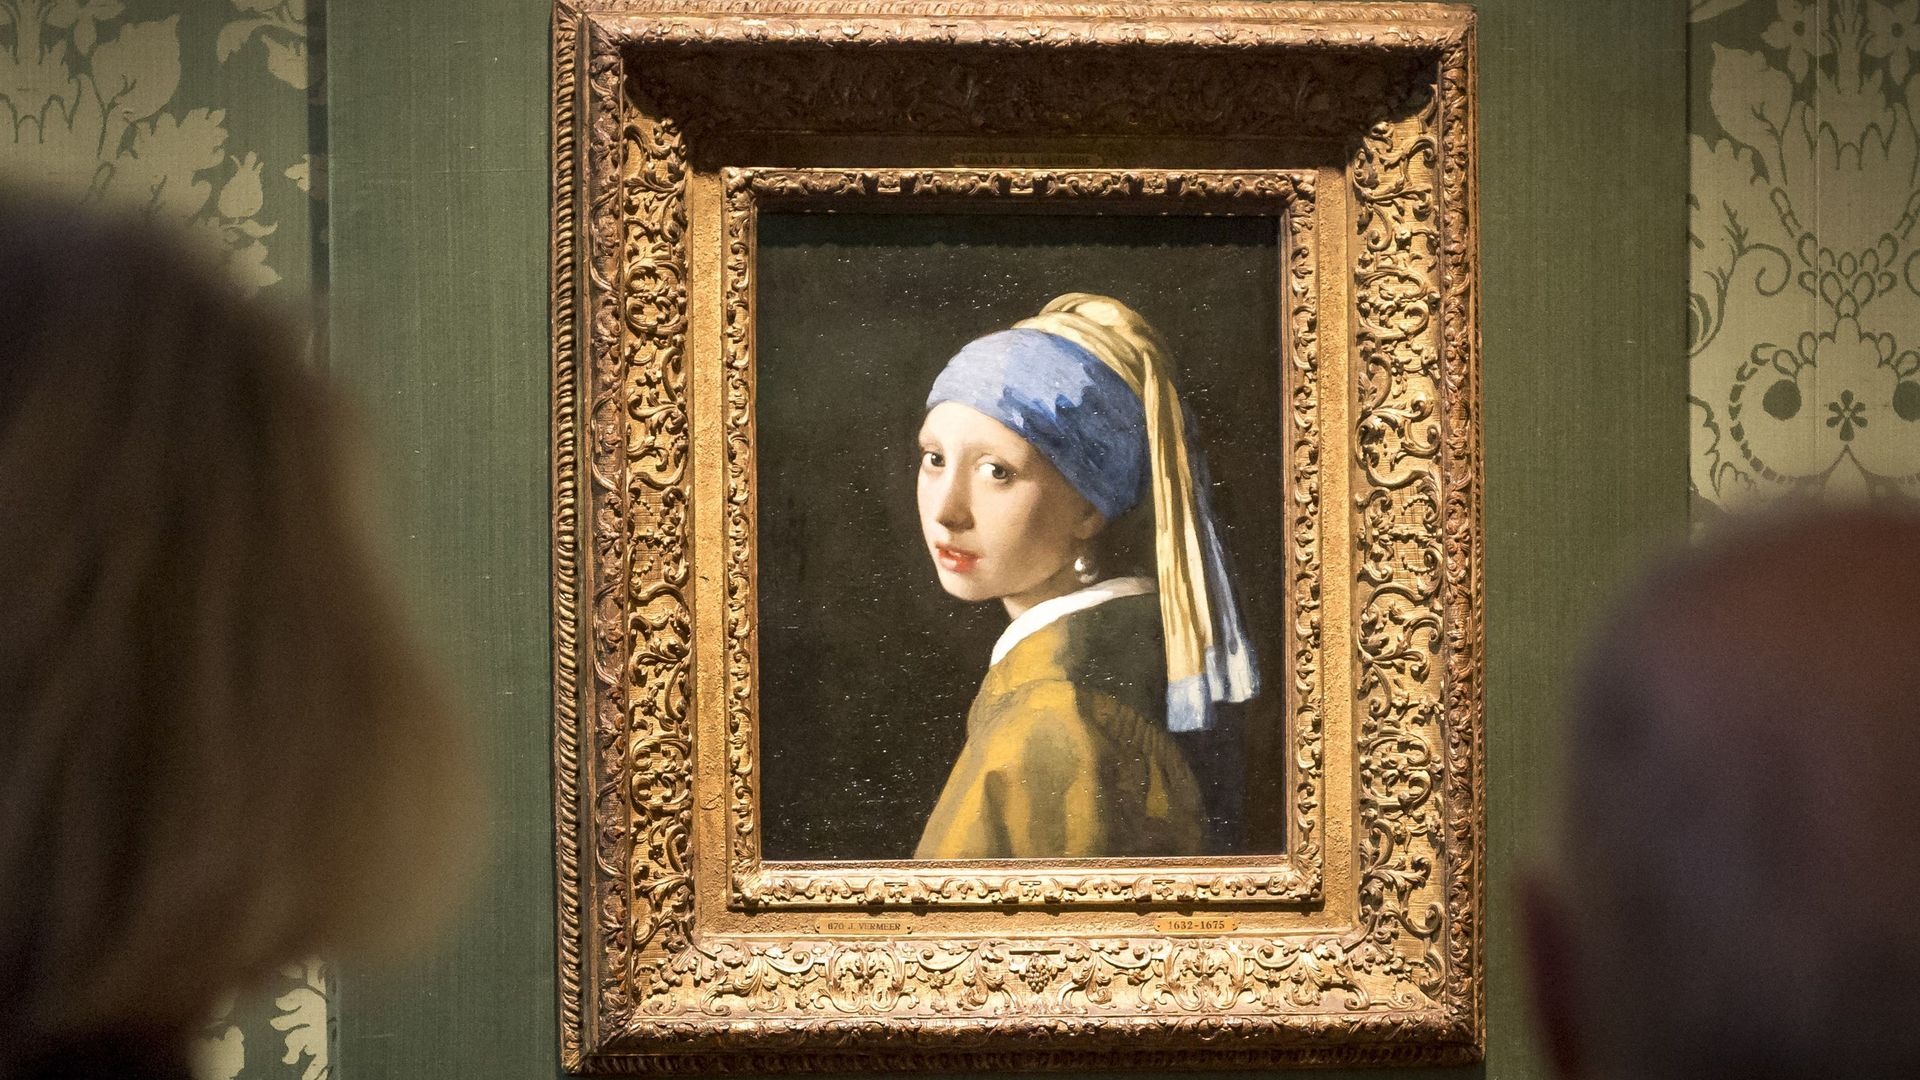 People viewing Johannes Vermeer's painting "Girl with a Pearl Earring" at the Mauritshuis museum in The Hague on Oct. 27.